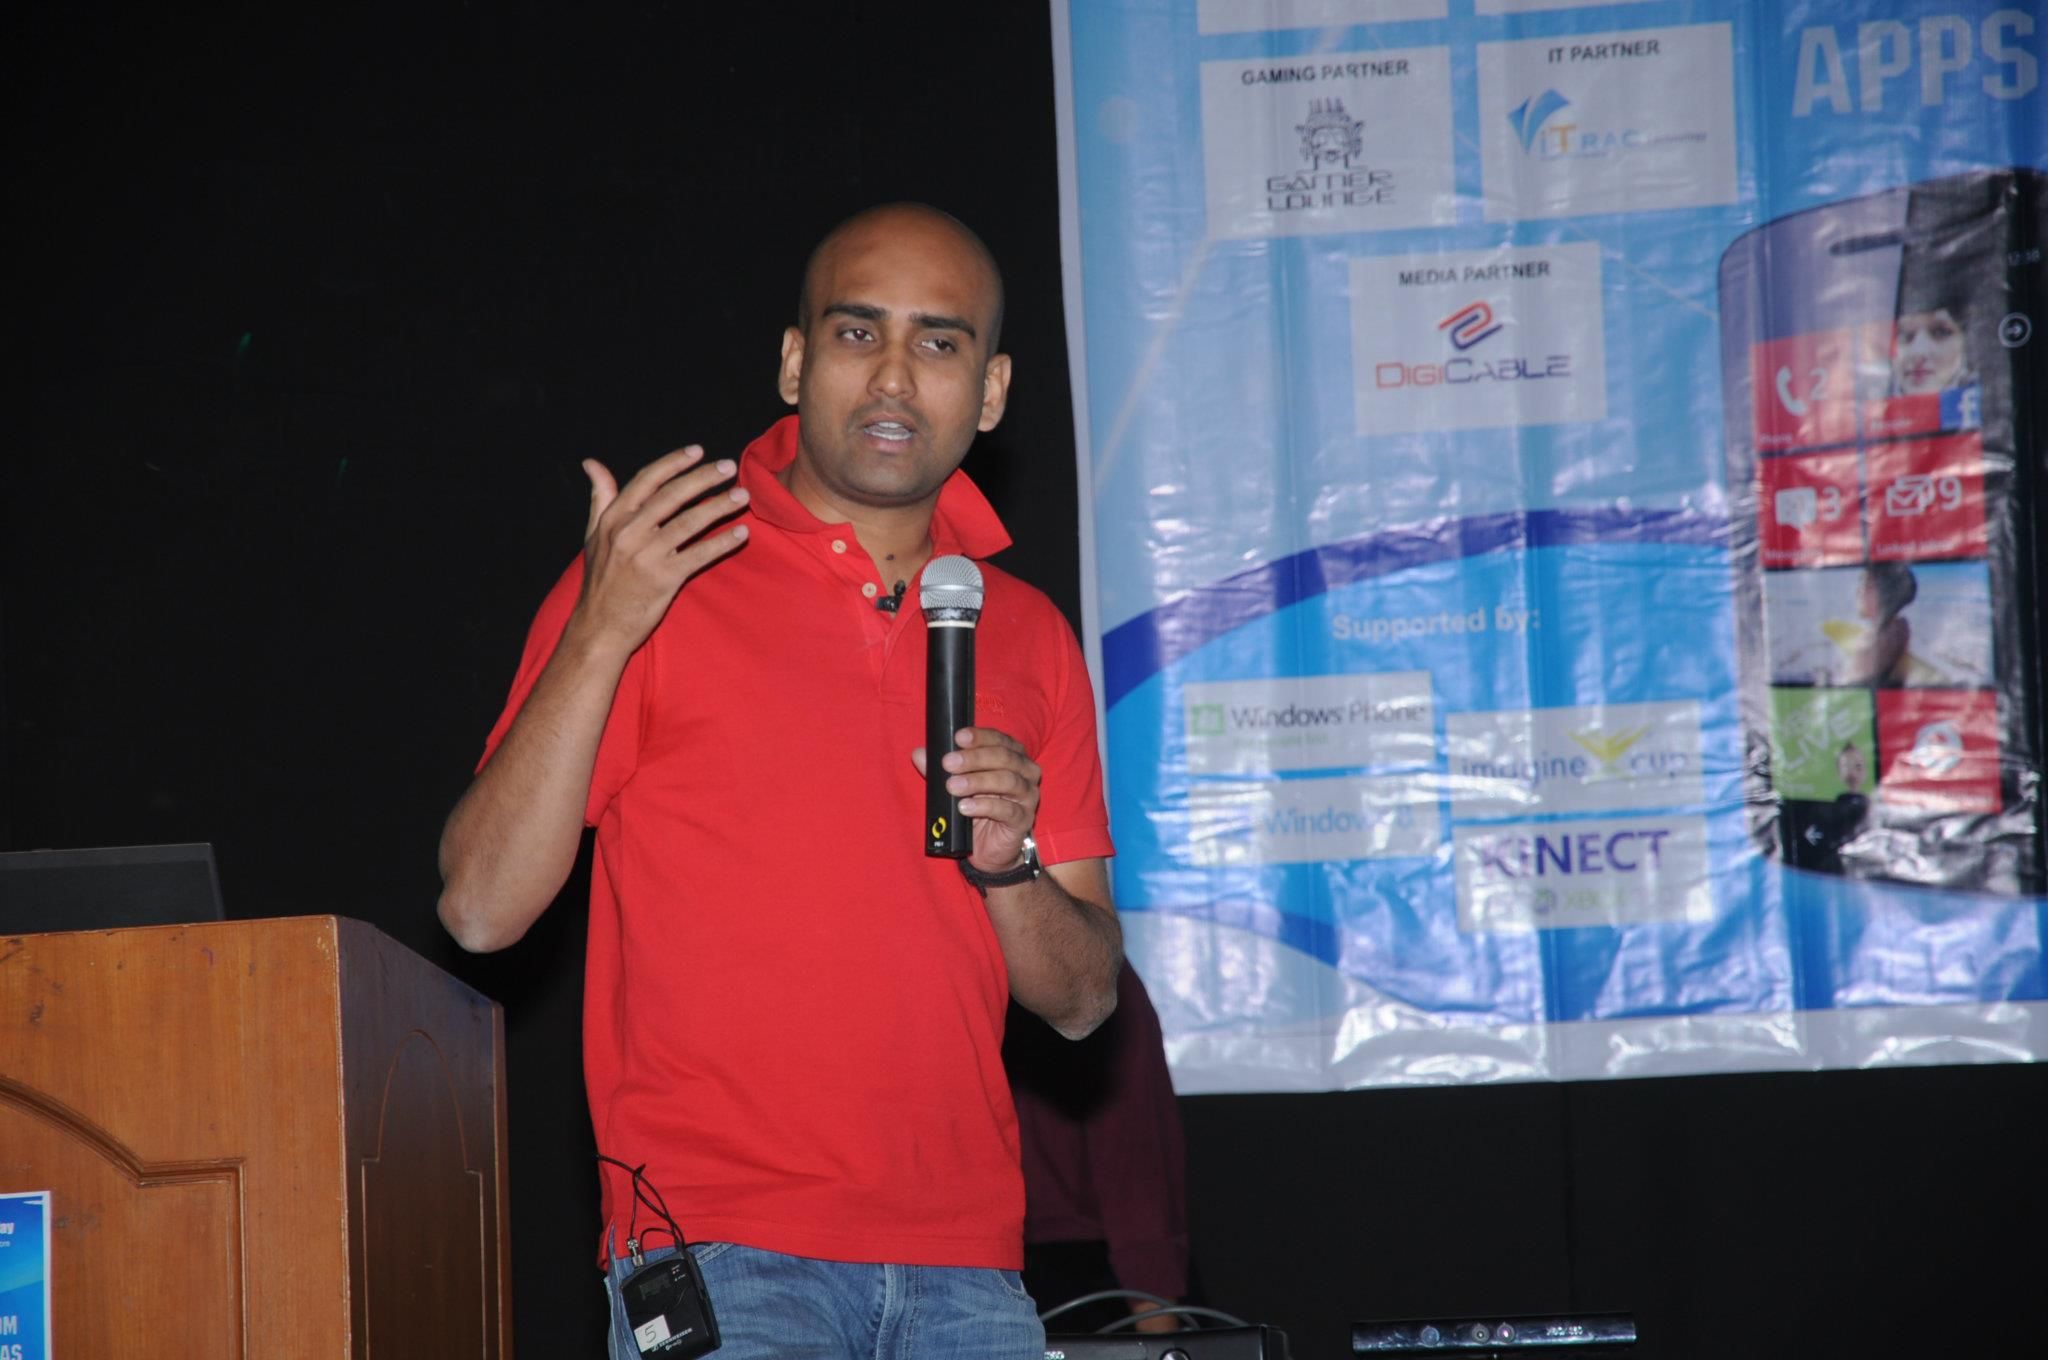 [Techie Tuesdays] Dhananjay Kumar - "Rather than creating an app, I want to enable 100 people so that they can create 100 apps"